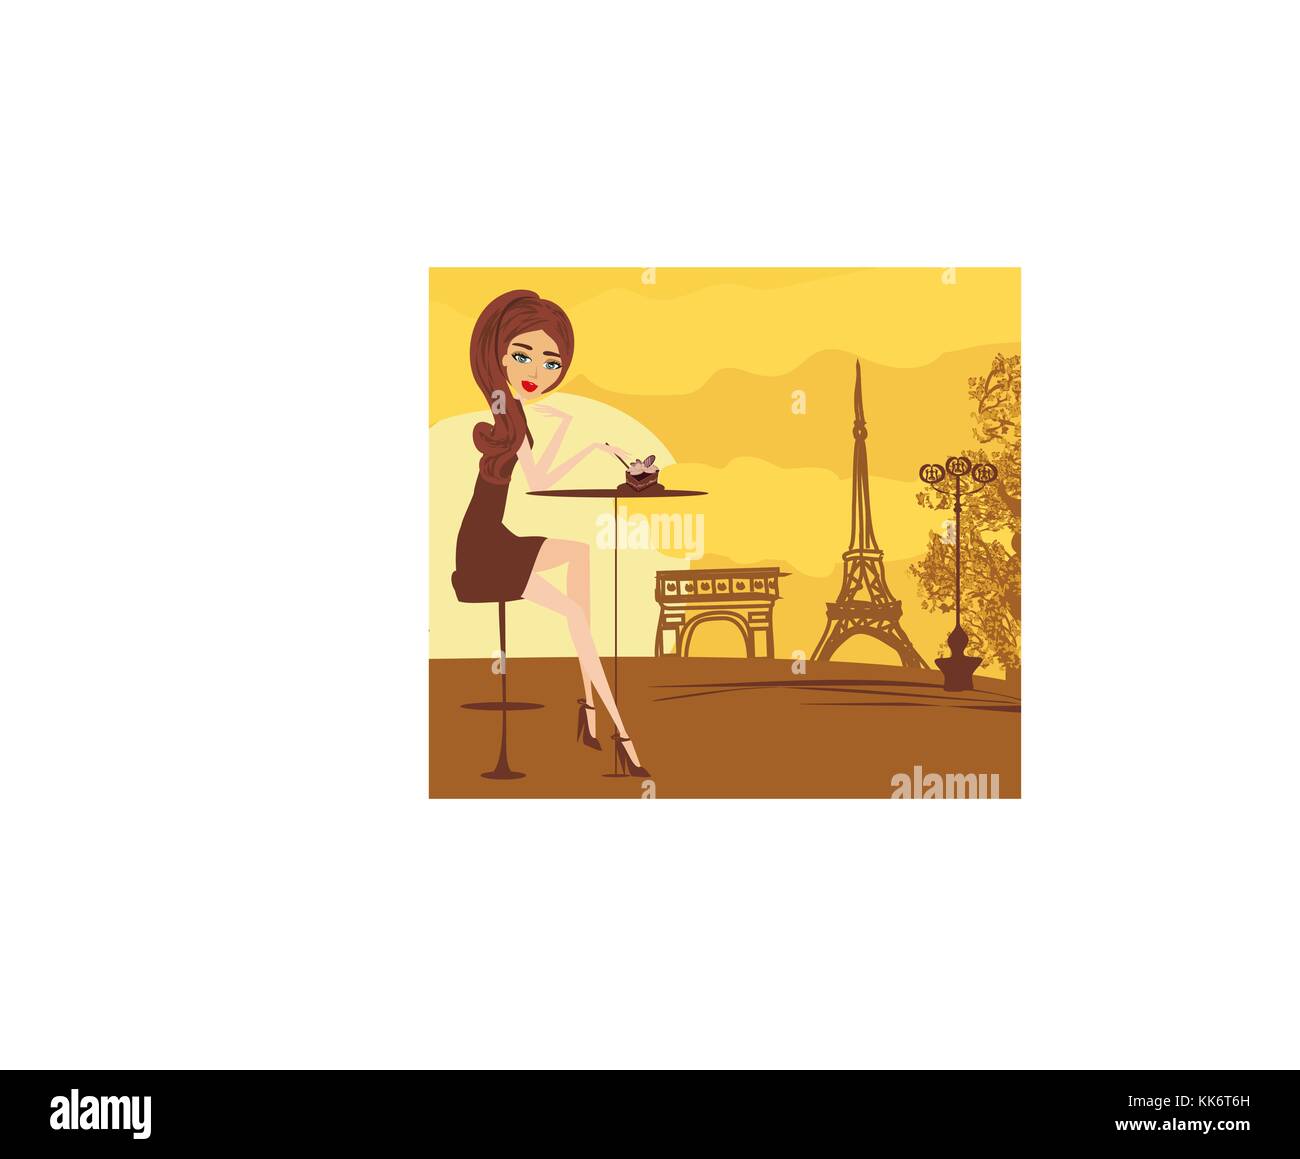 Parisian people Stock Vector Images - Alamy